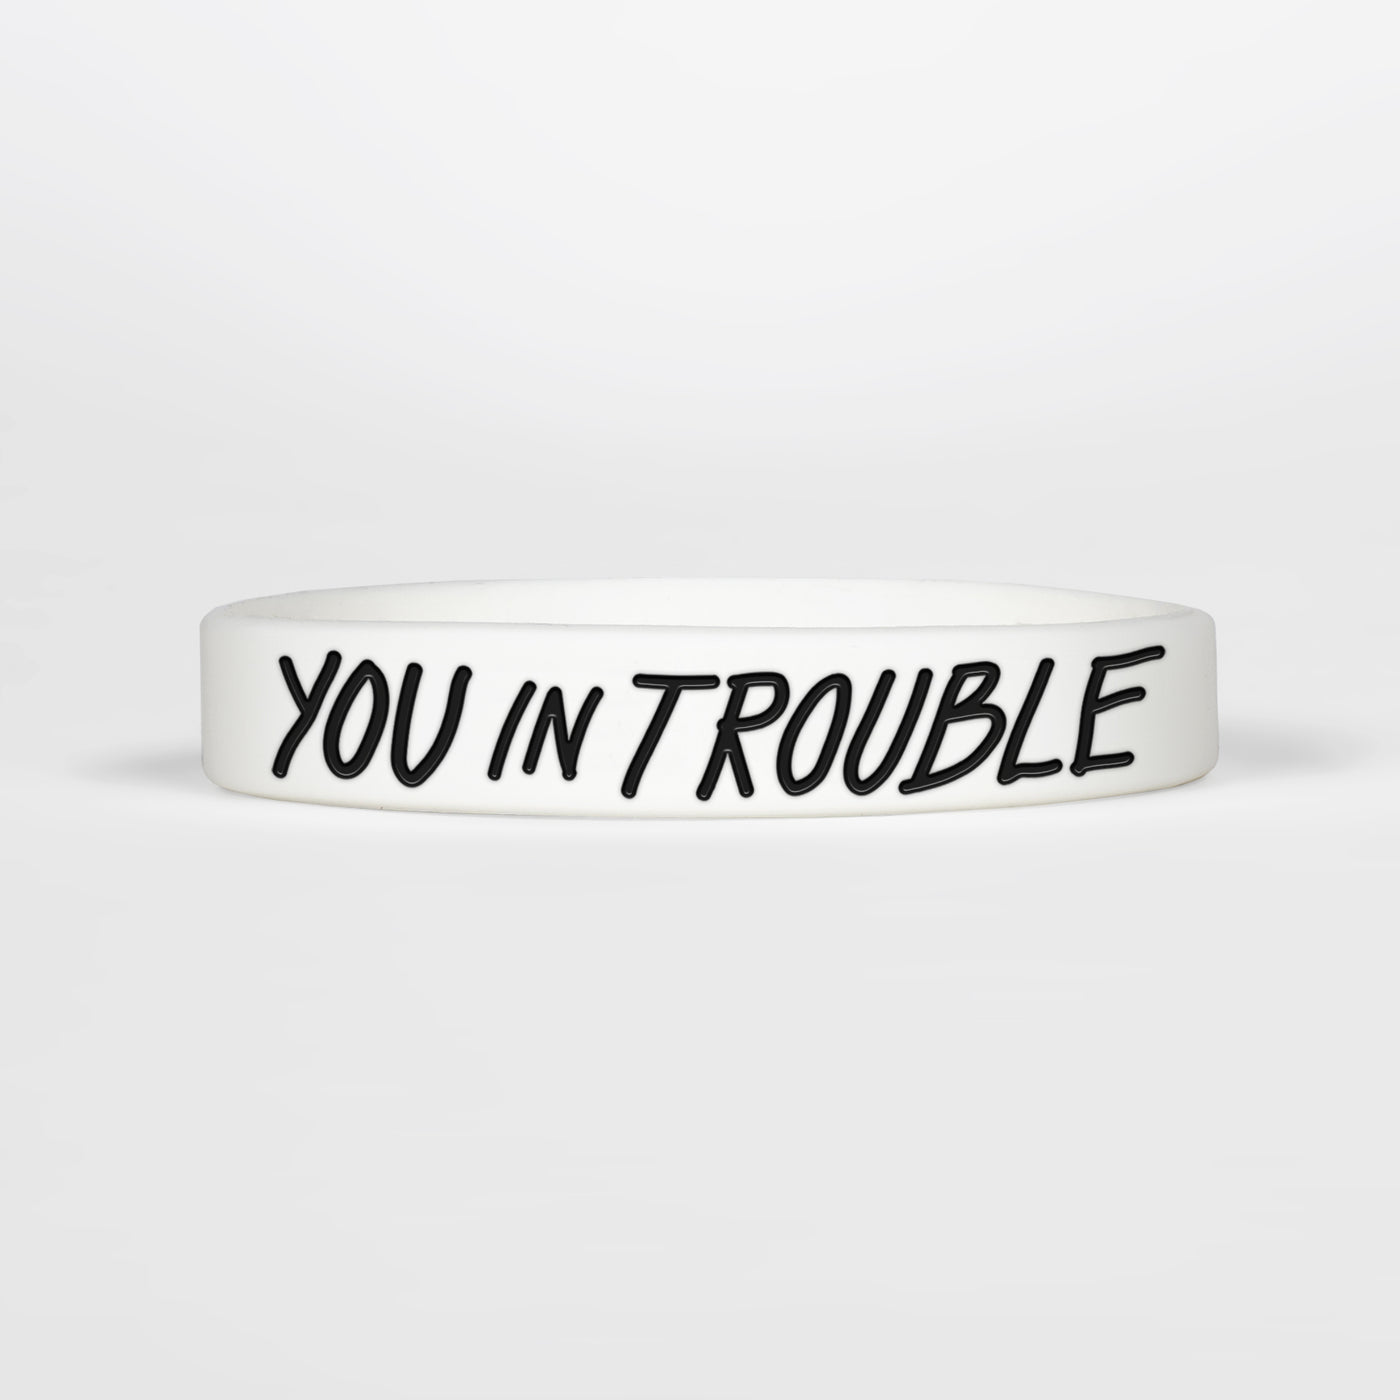 You in Trouble Motivational Wristband